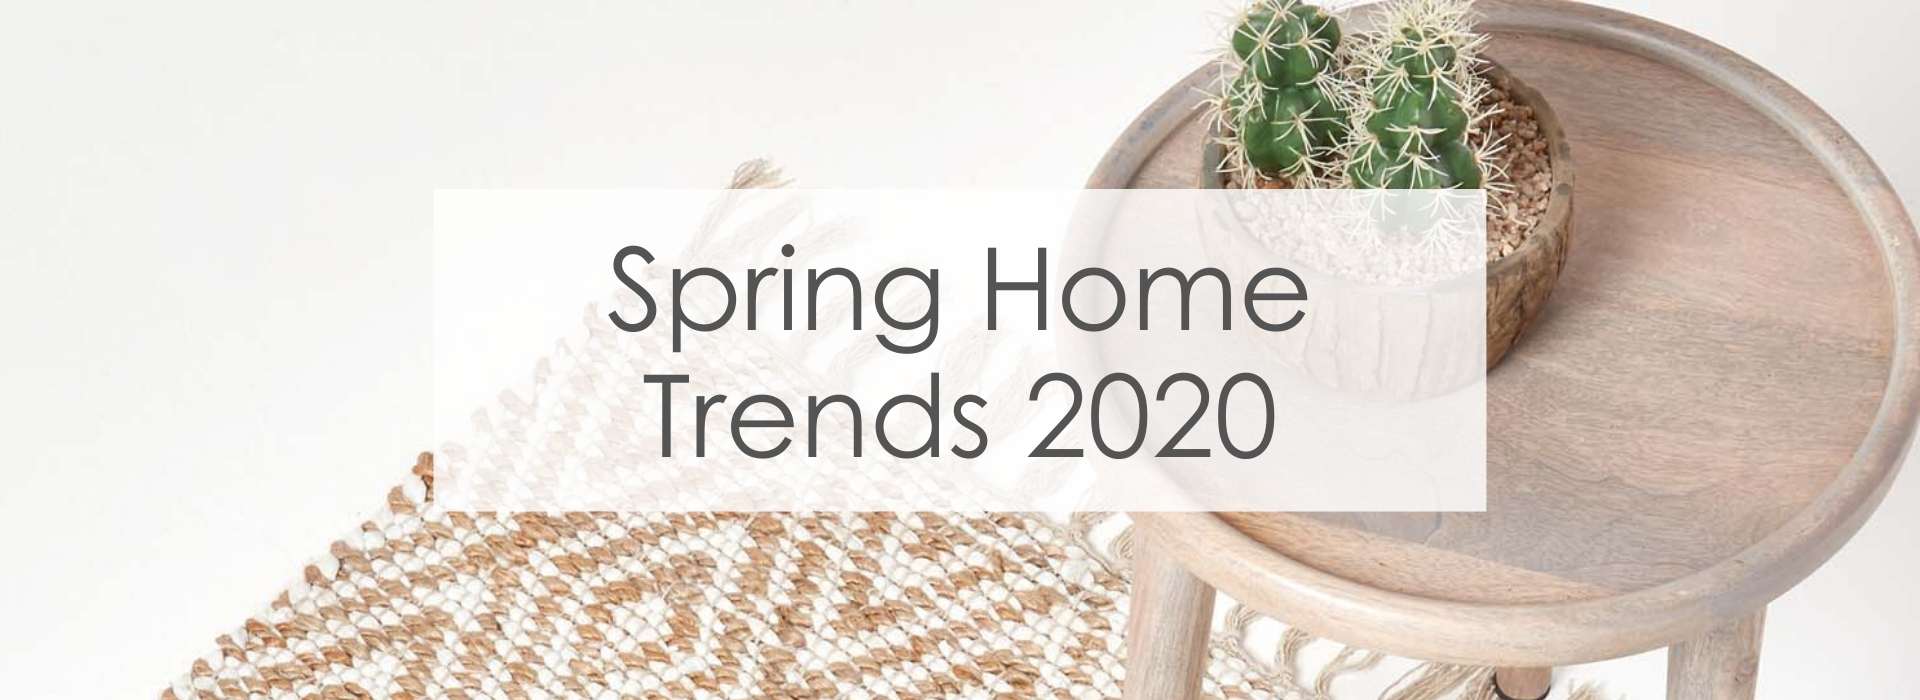 Spring Home trends 2020